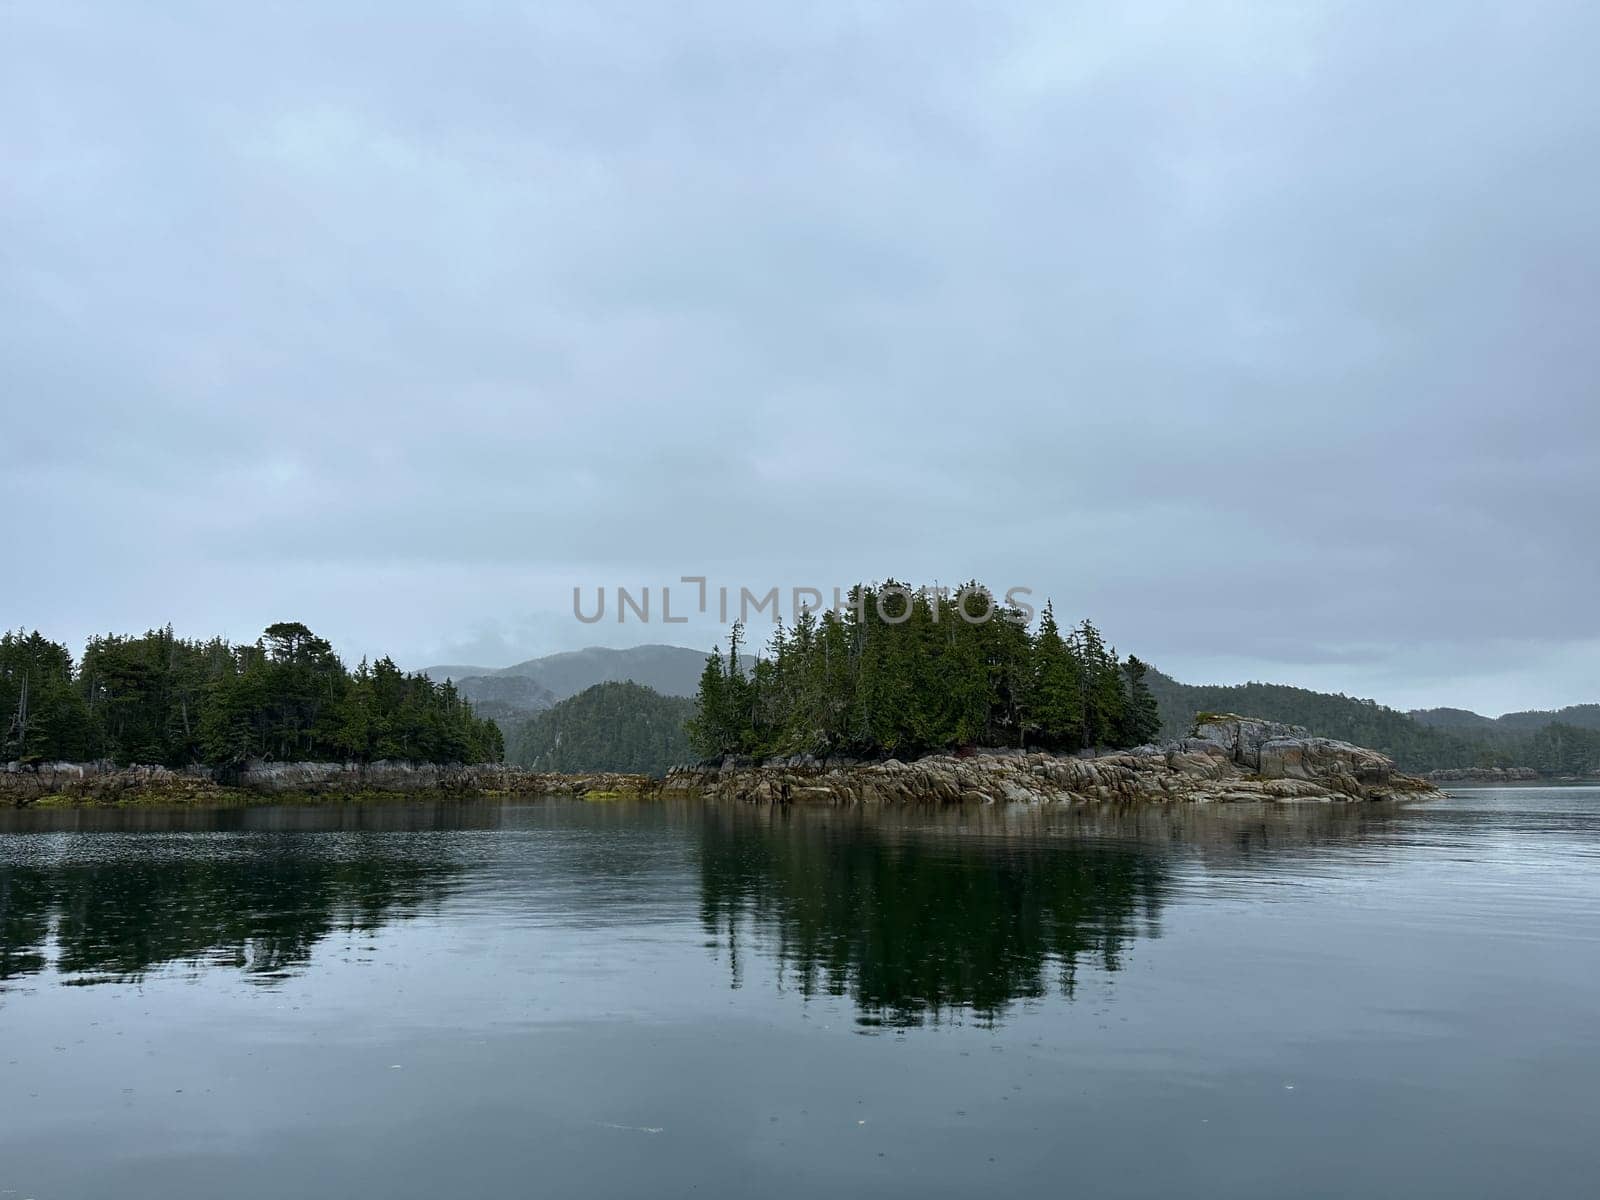 View of several islands on an overcast day along the Central Coast of British Columbia by Granchinho